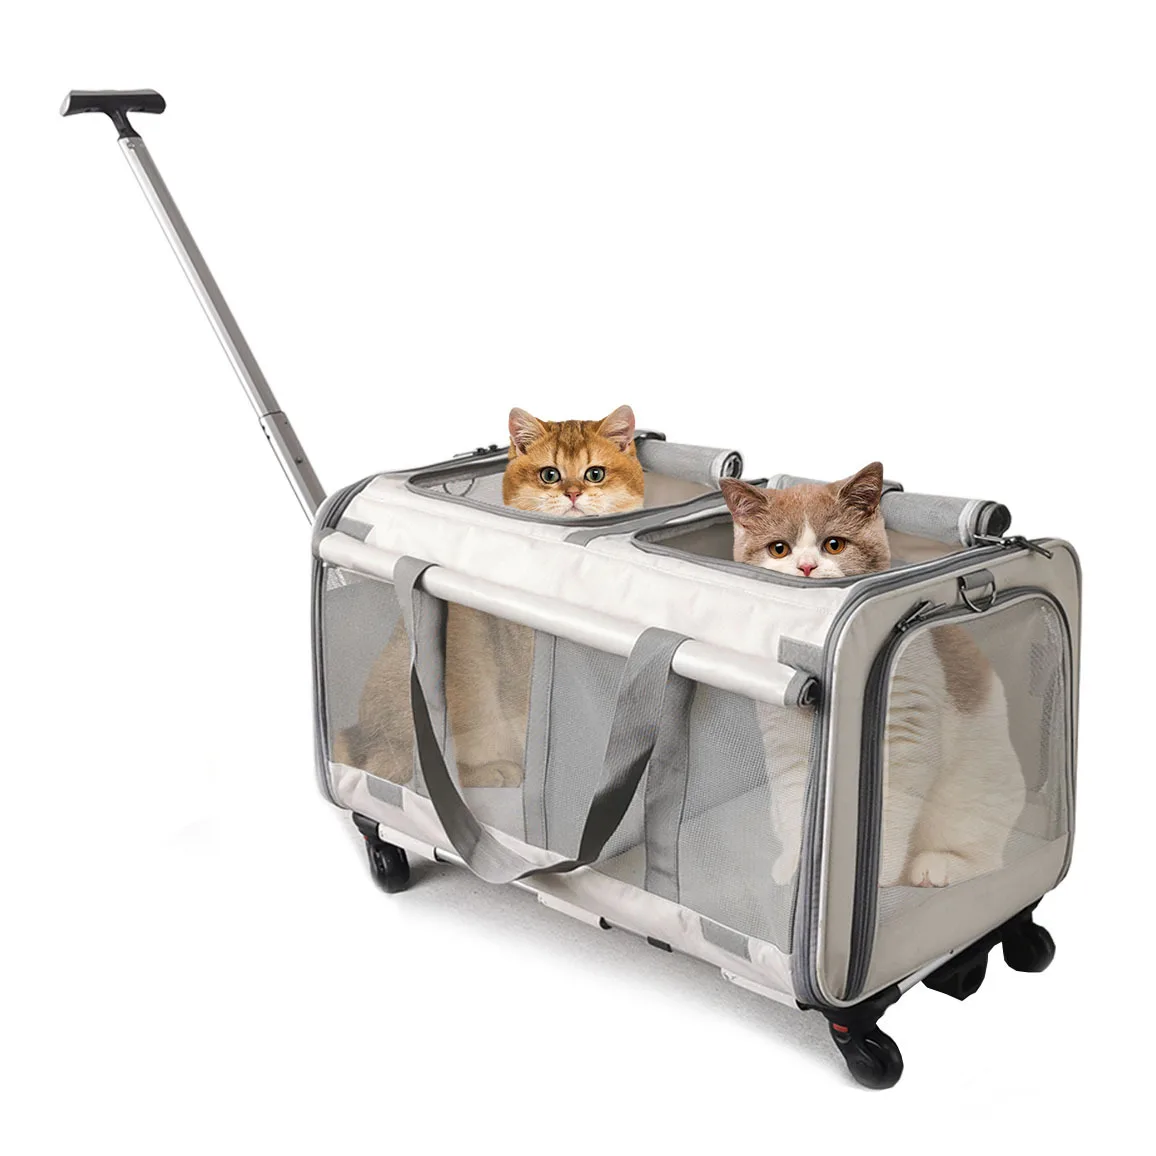 https://ae01.alicdn.com/kf/S72bd549348014053859b91a3f0f1e176A/Foldable-Pet-Trolley-Case-Large-Double-layer-Portable-Breathable-Dog-Carrier-Bags-for-Small-Dogs-Cat.jpg